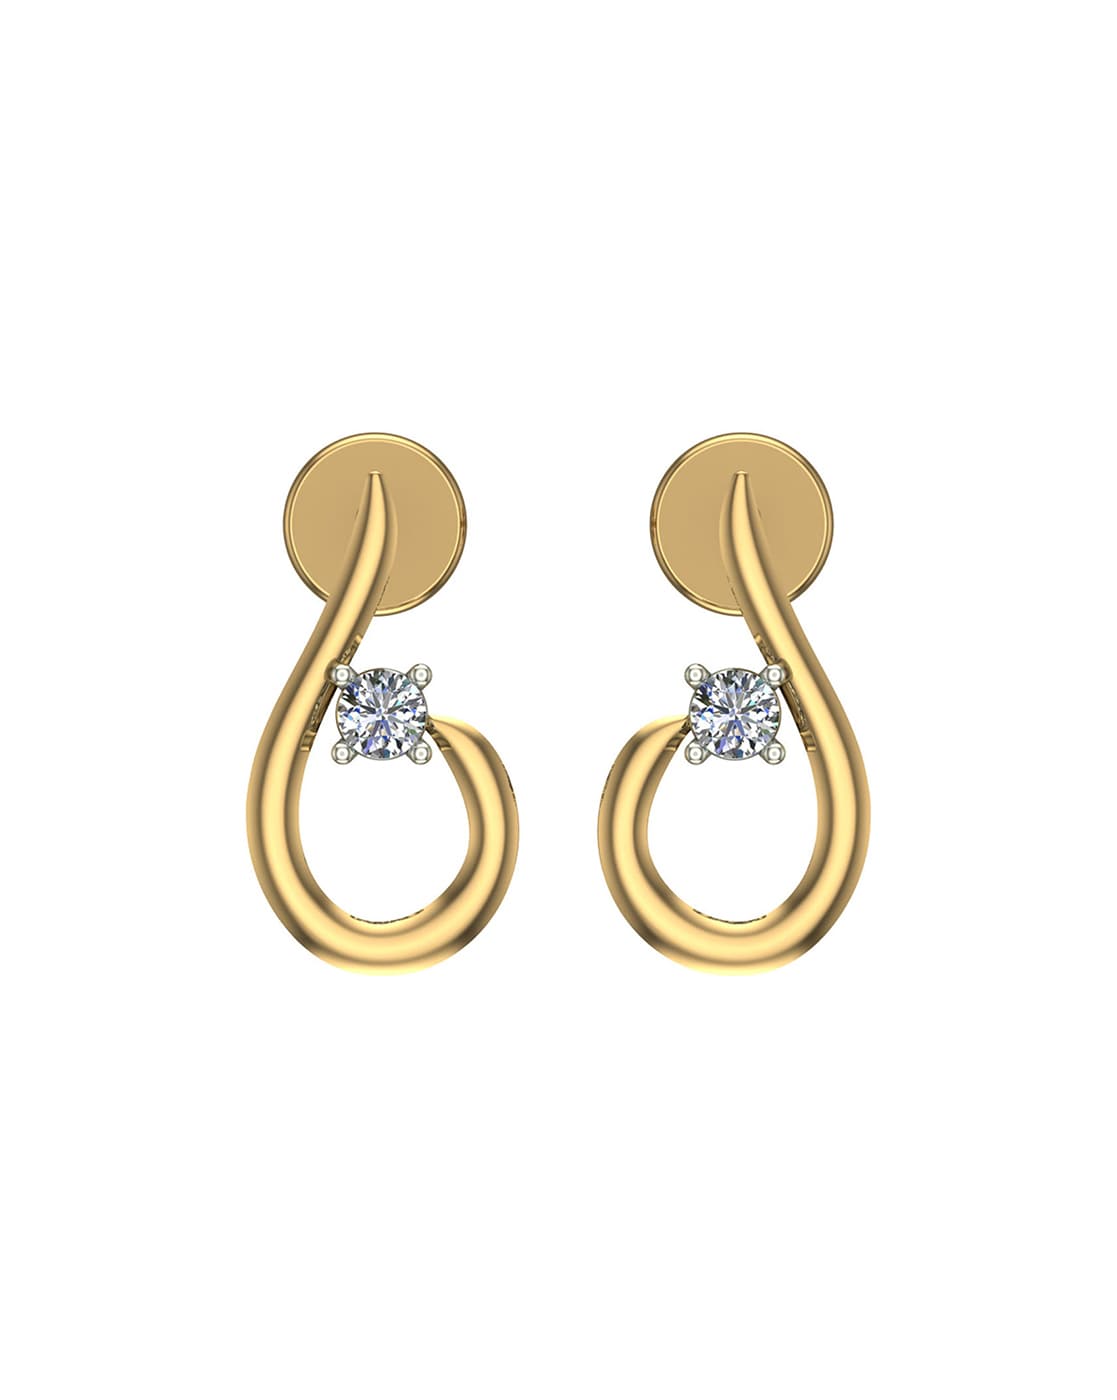 Buy Sparkling Artificial Diamond Earrings Design for Ladies